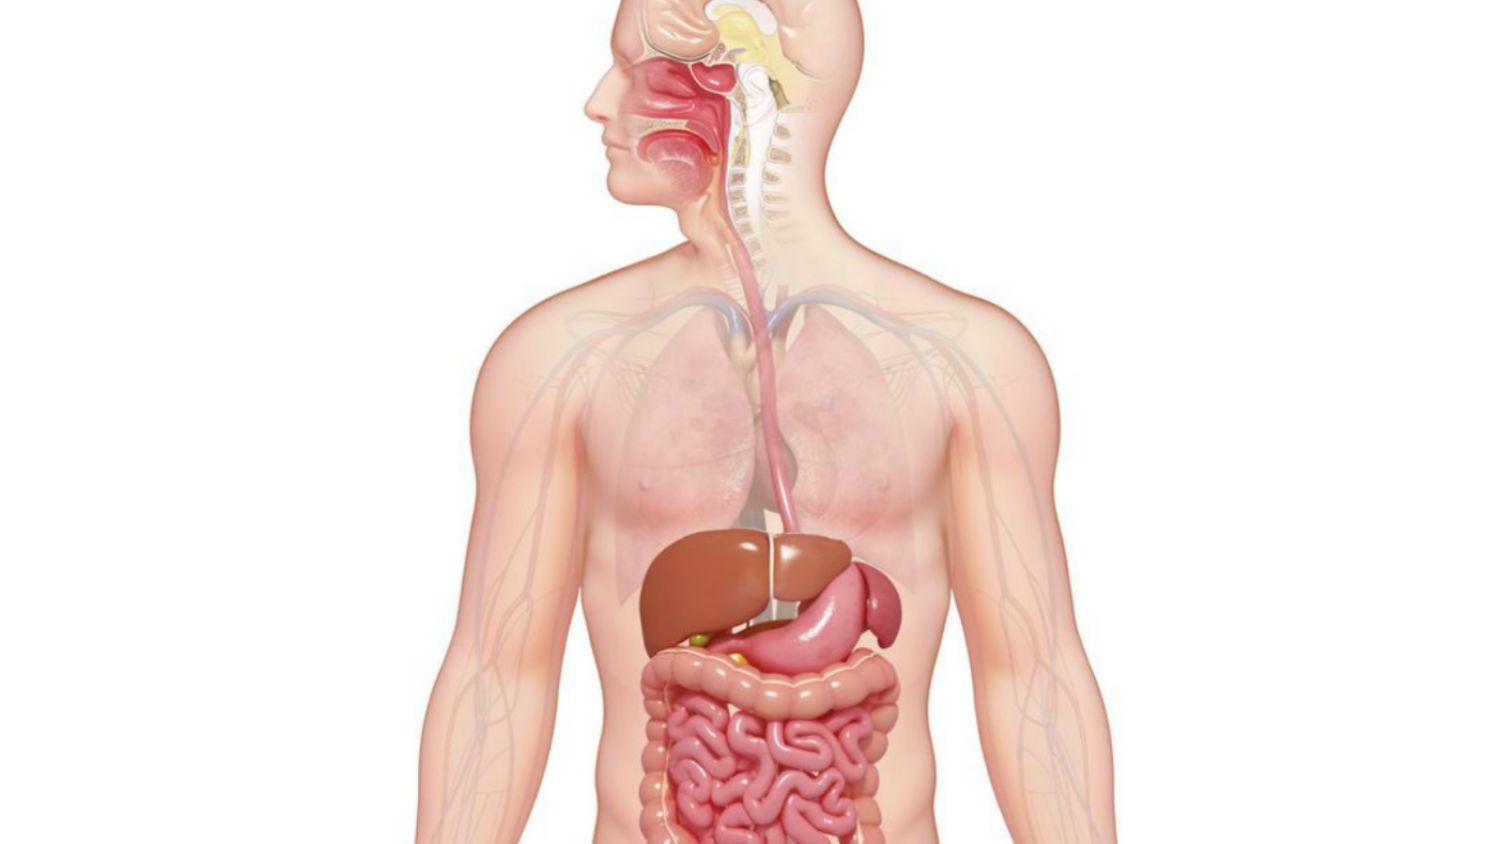 Digestive System - Yuvaan Nature Foundation